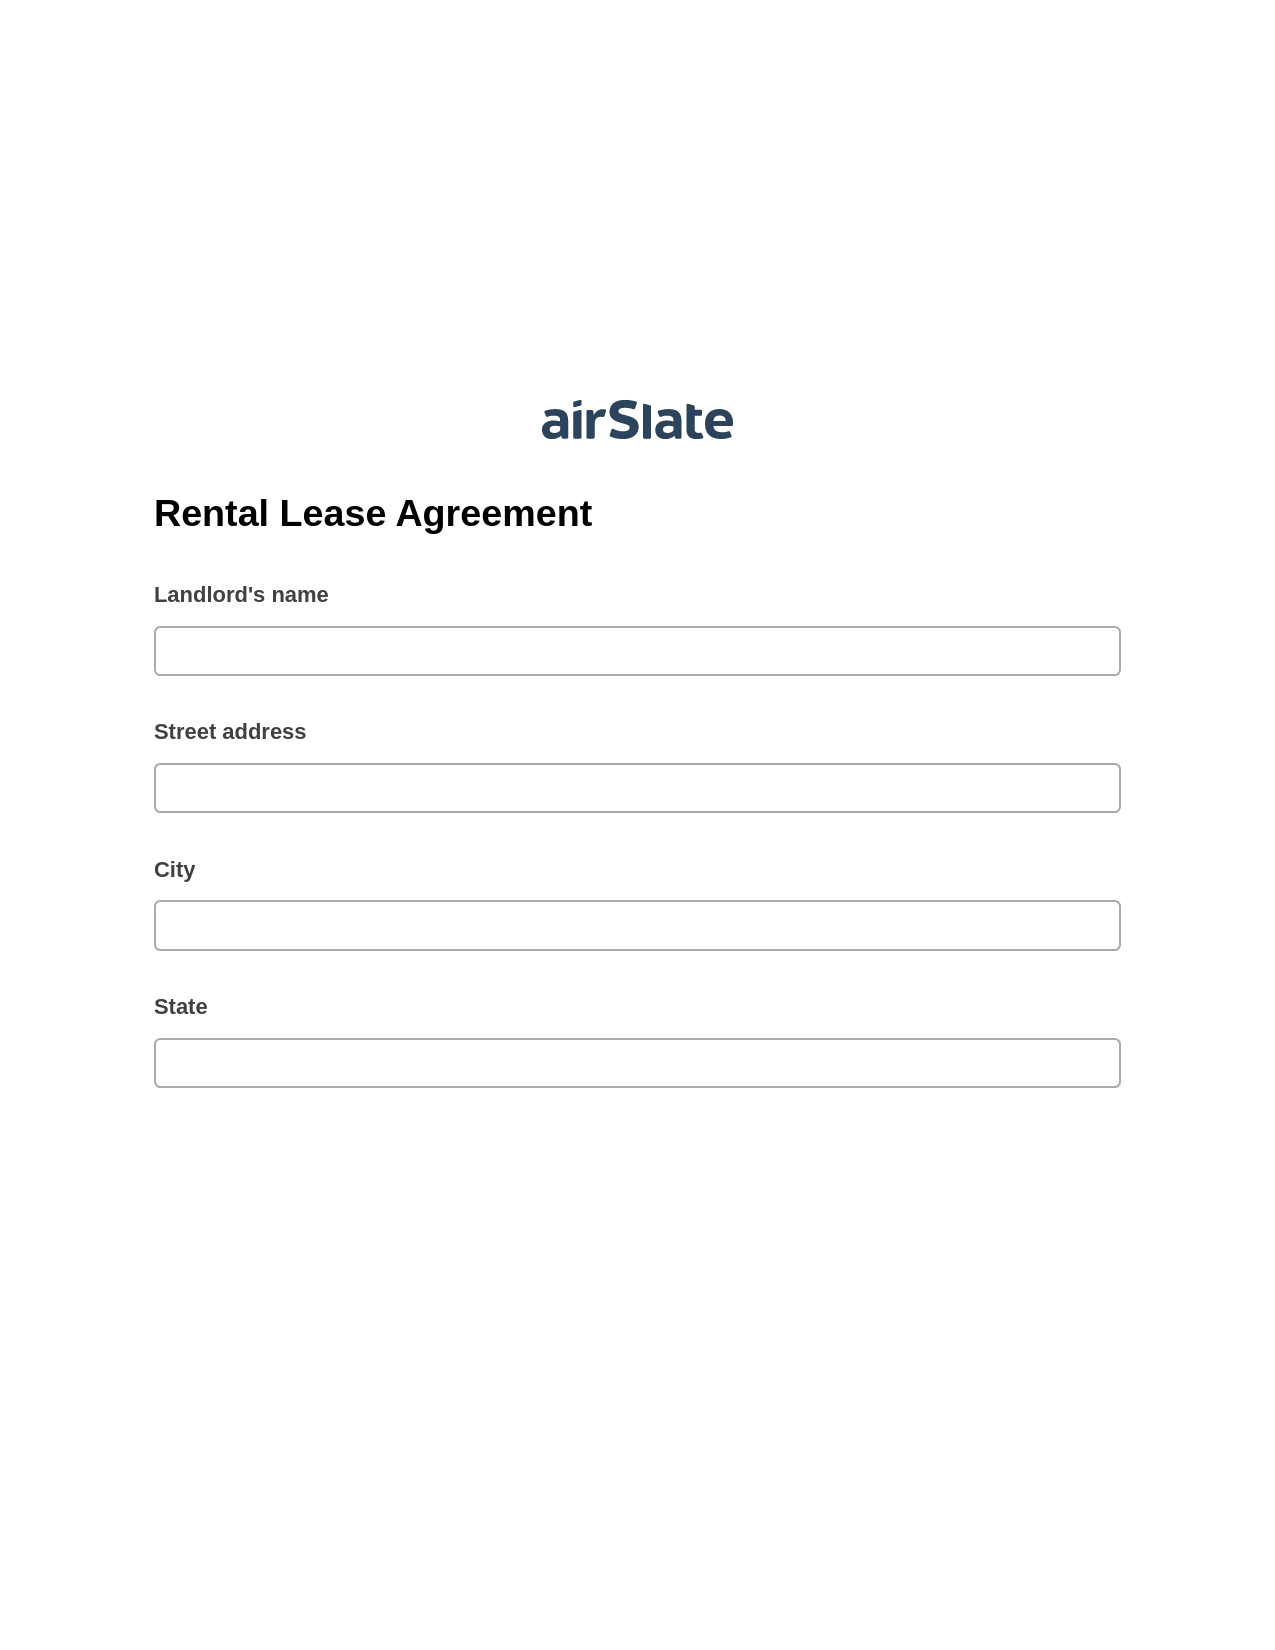 Multirole Rental Lease Agreement Pre-fill from Excel Spreadsheet Dropdown Options Bot, Invoke Salesforce Process Bot, Export to Excel 365 Bot